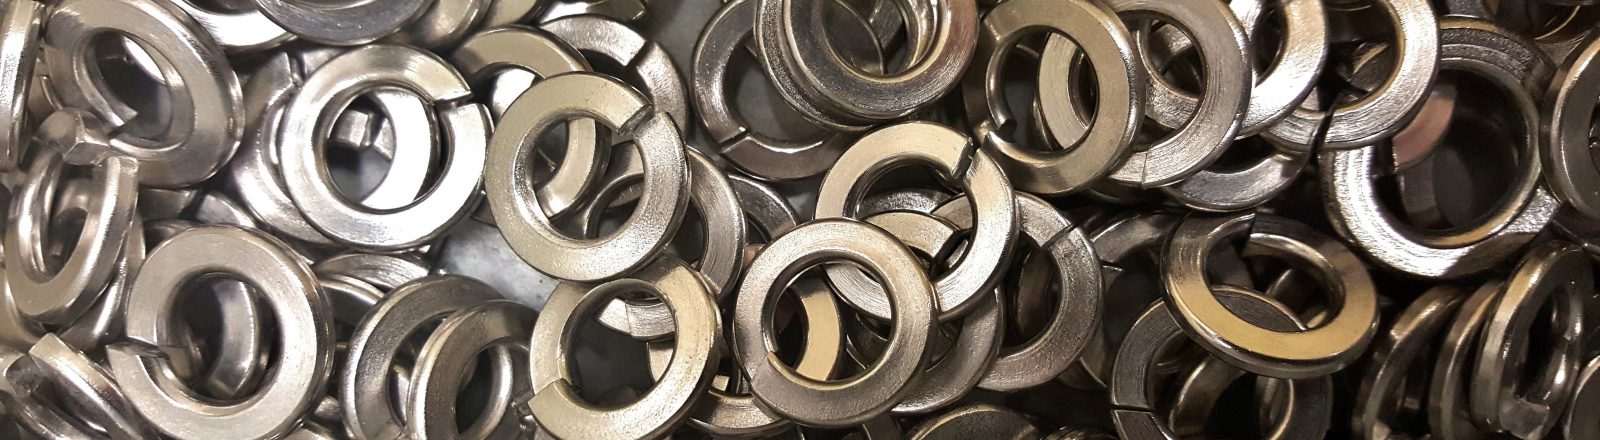 small round metal part manufactured